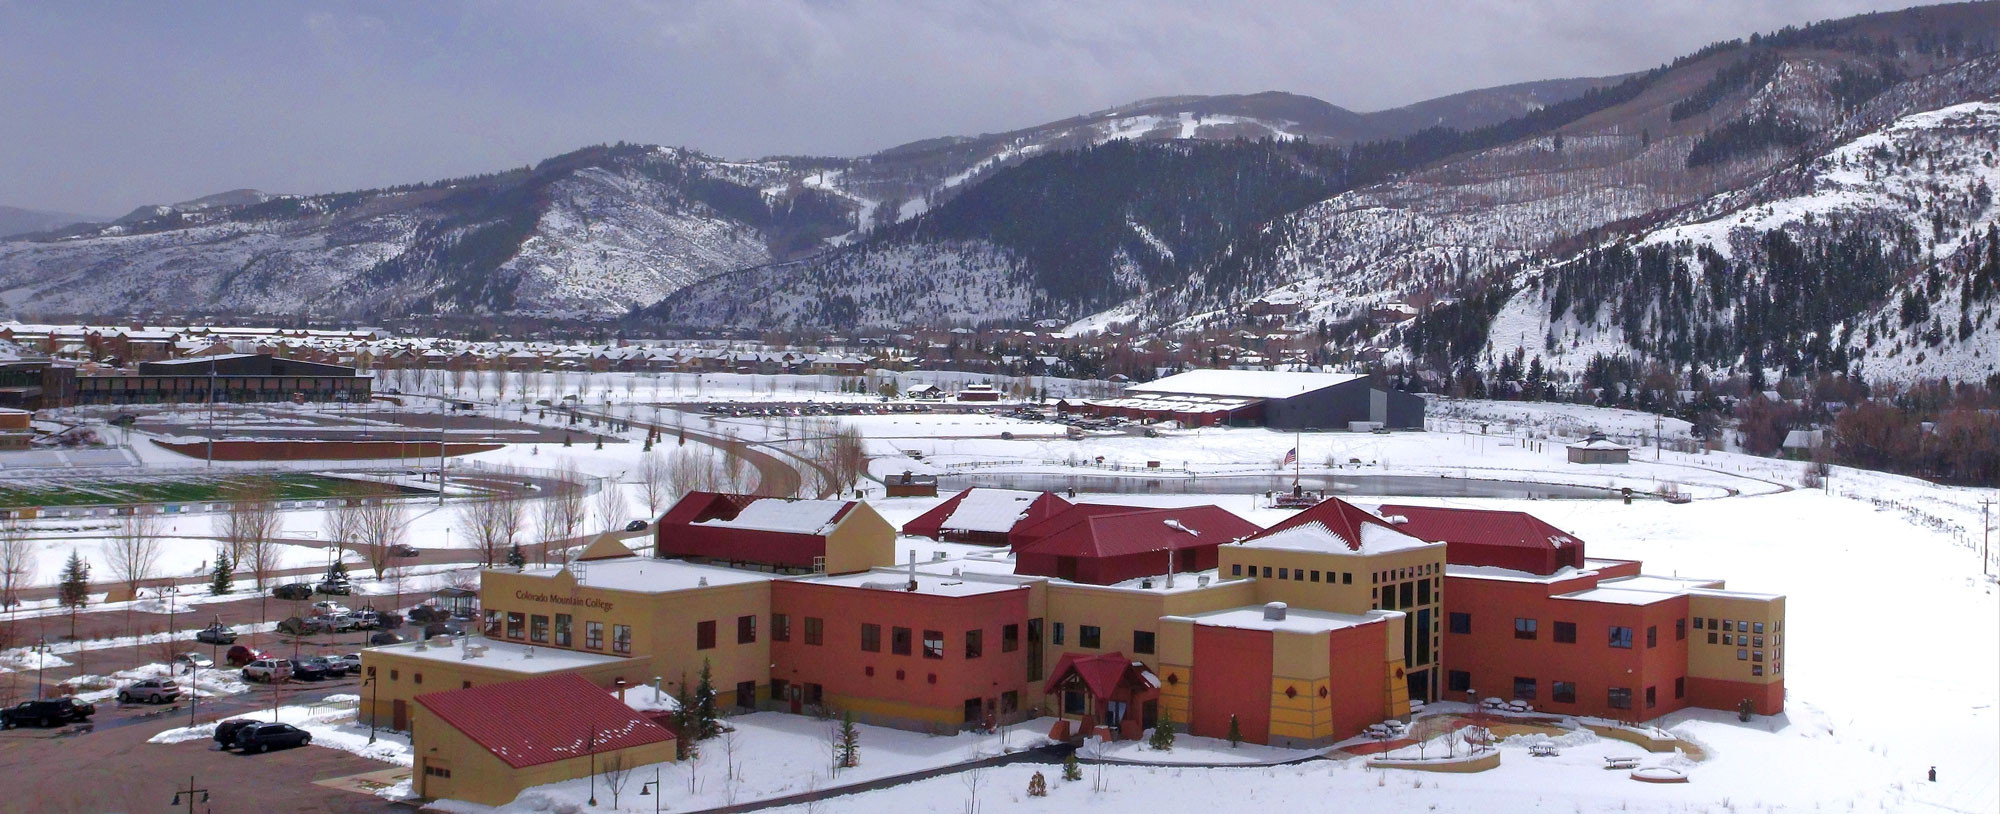 photo - panaramic shot of the CMC Vail Valley in Edwards campus